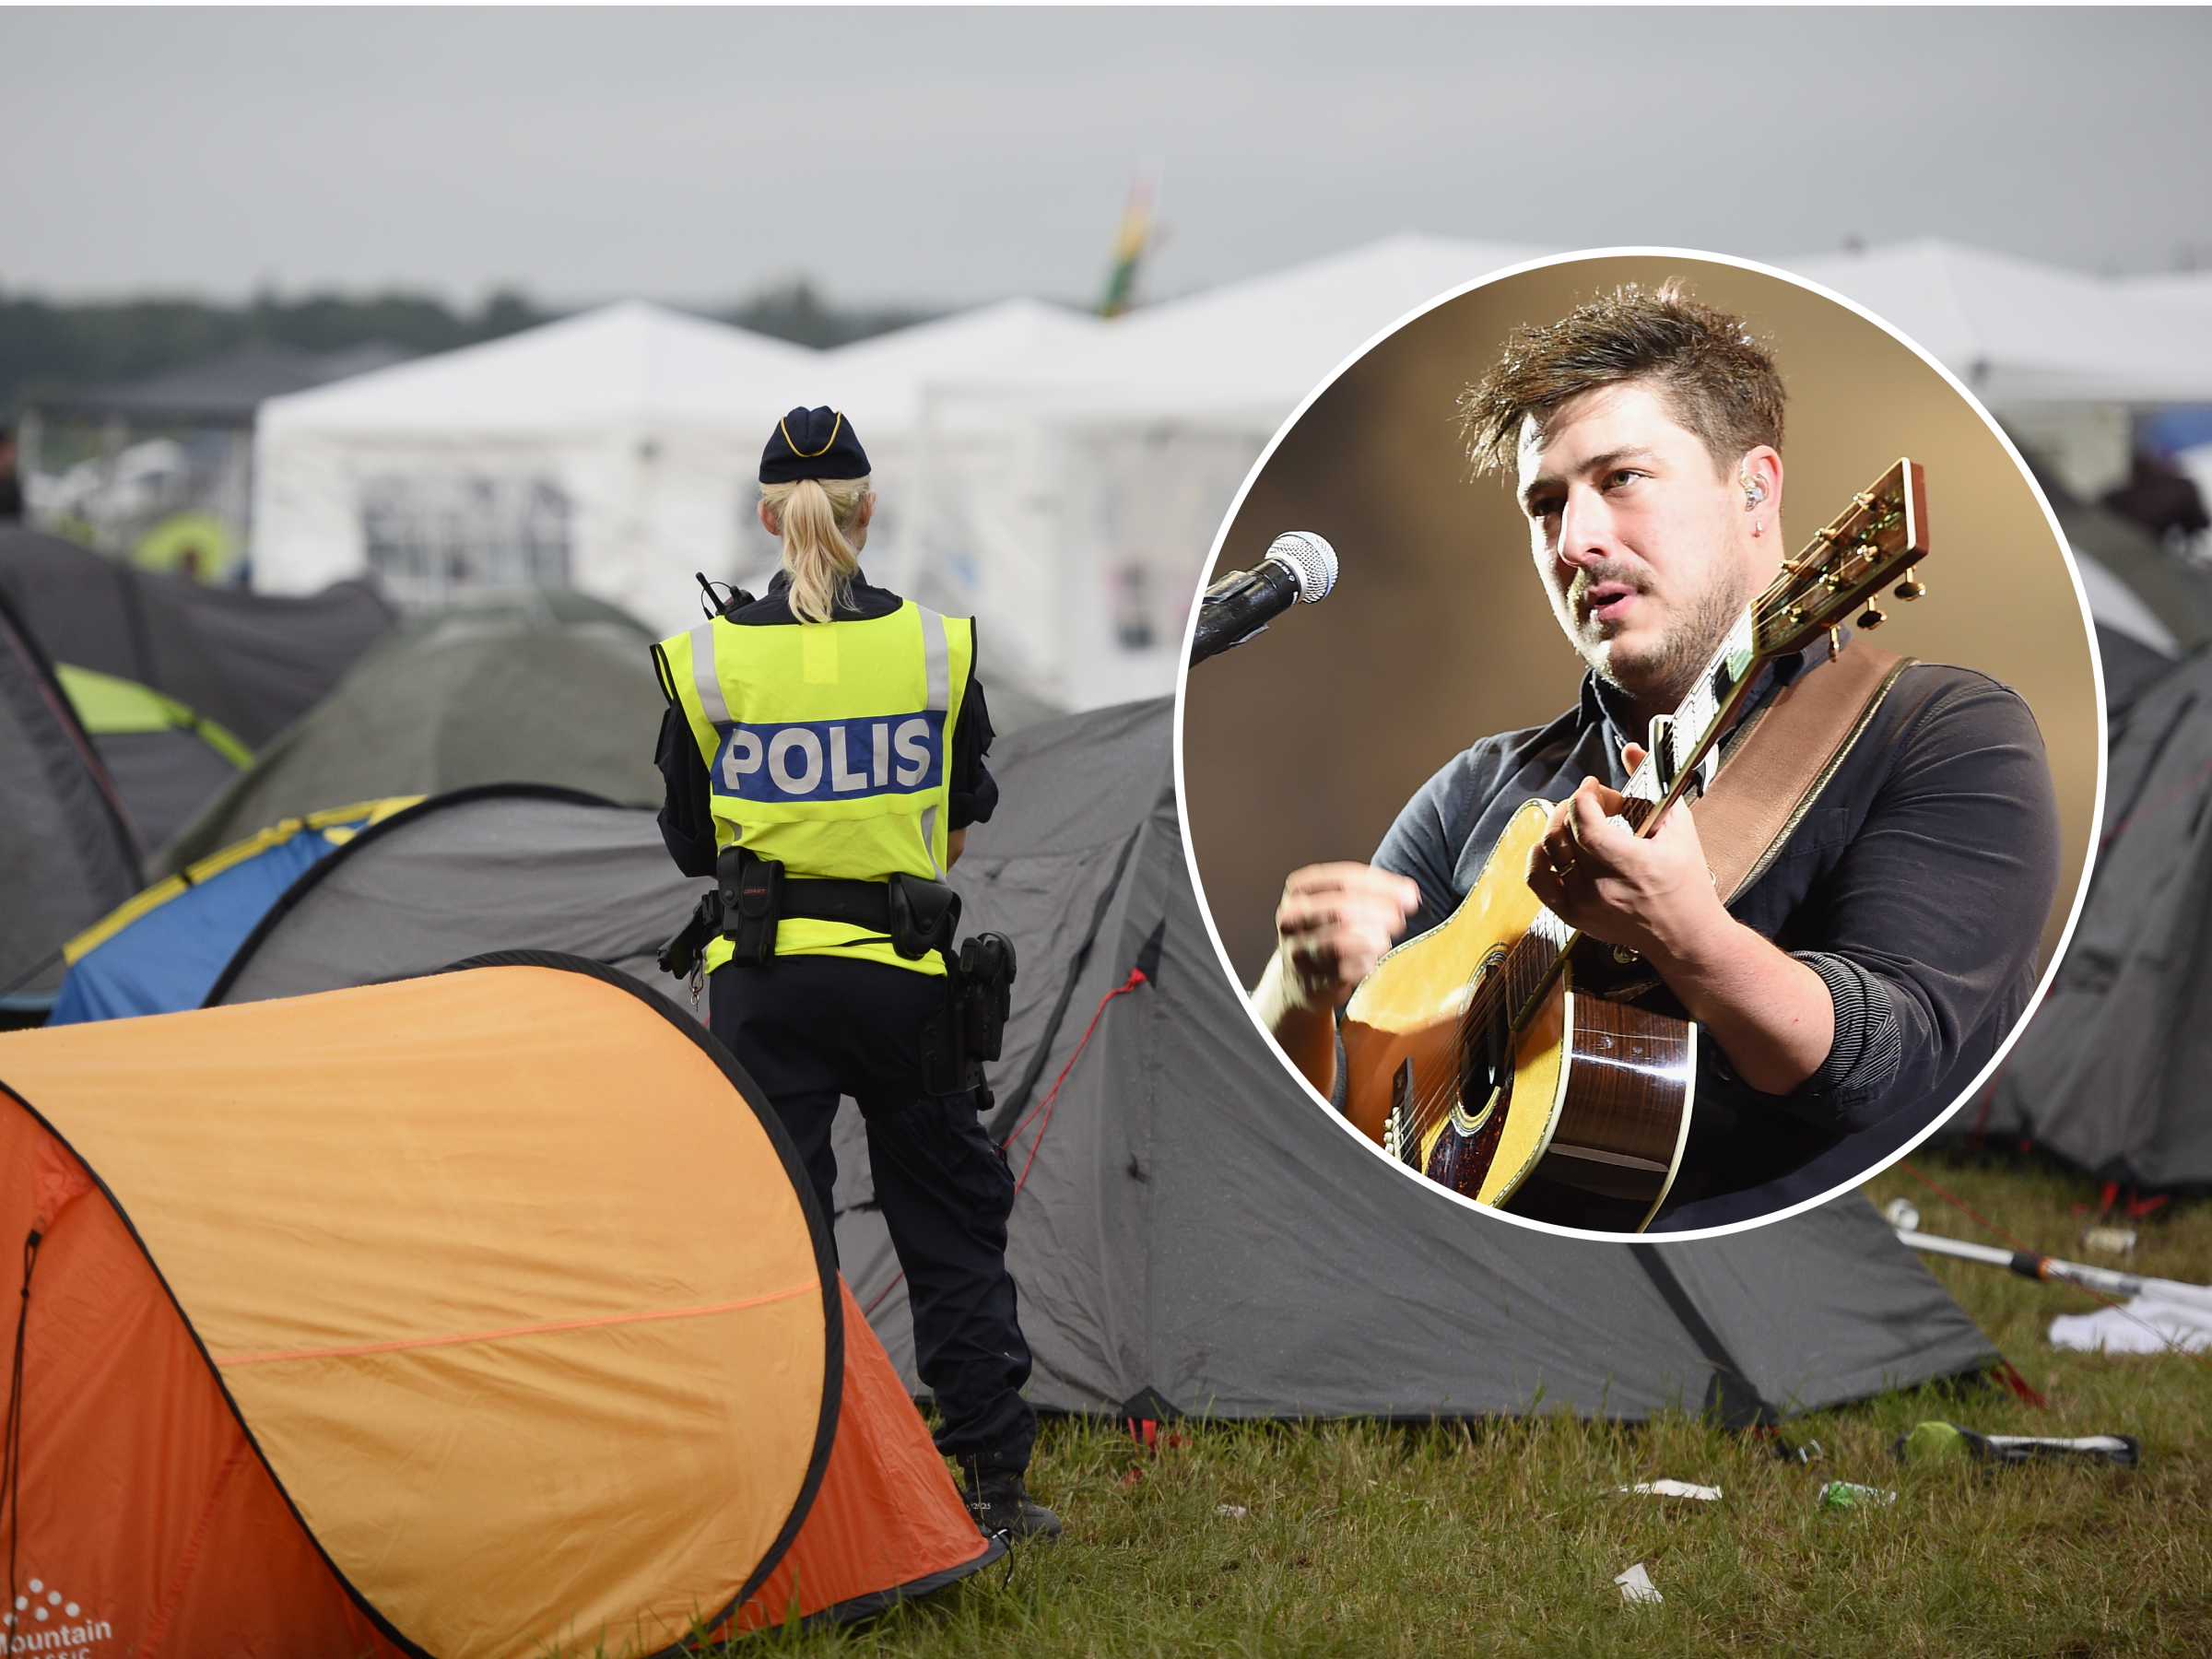 More than 40 sex assaults reported at two Swedish festivals